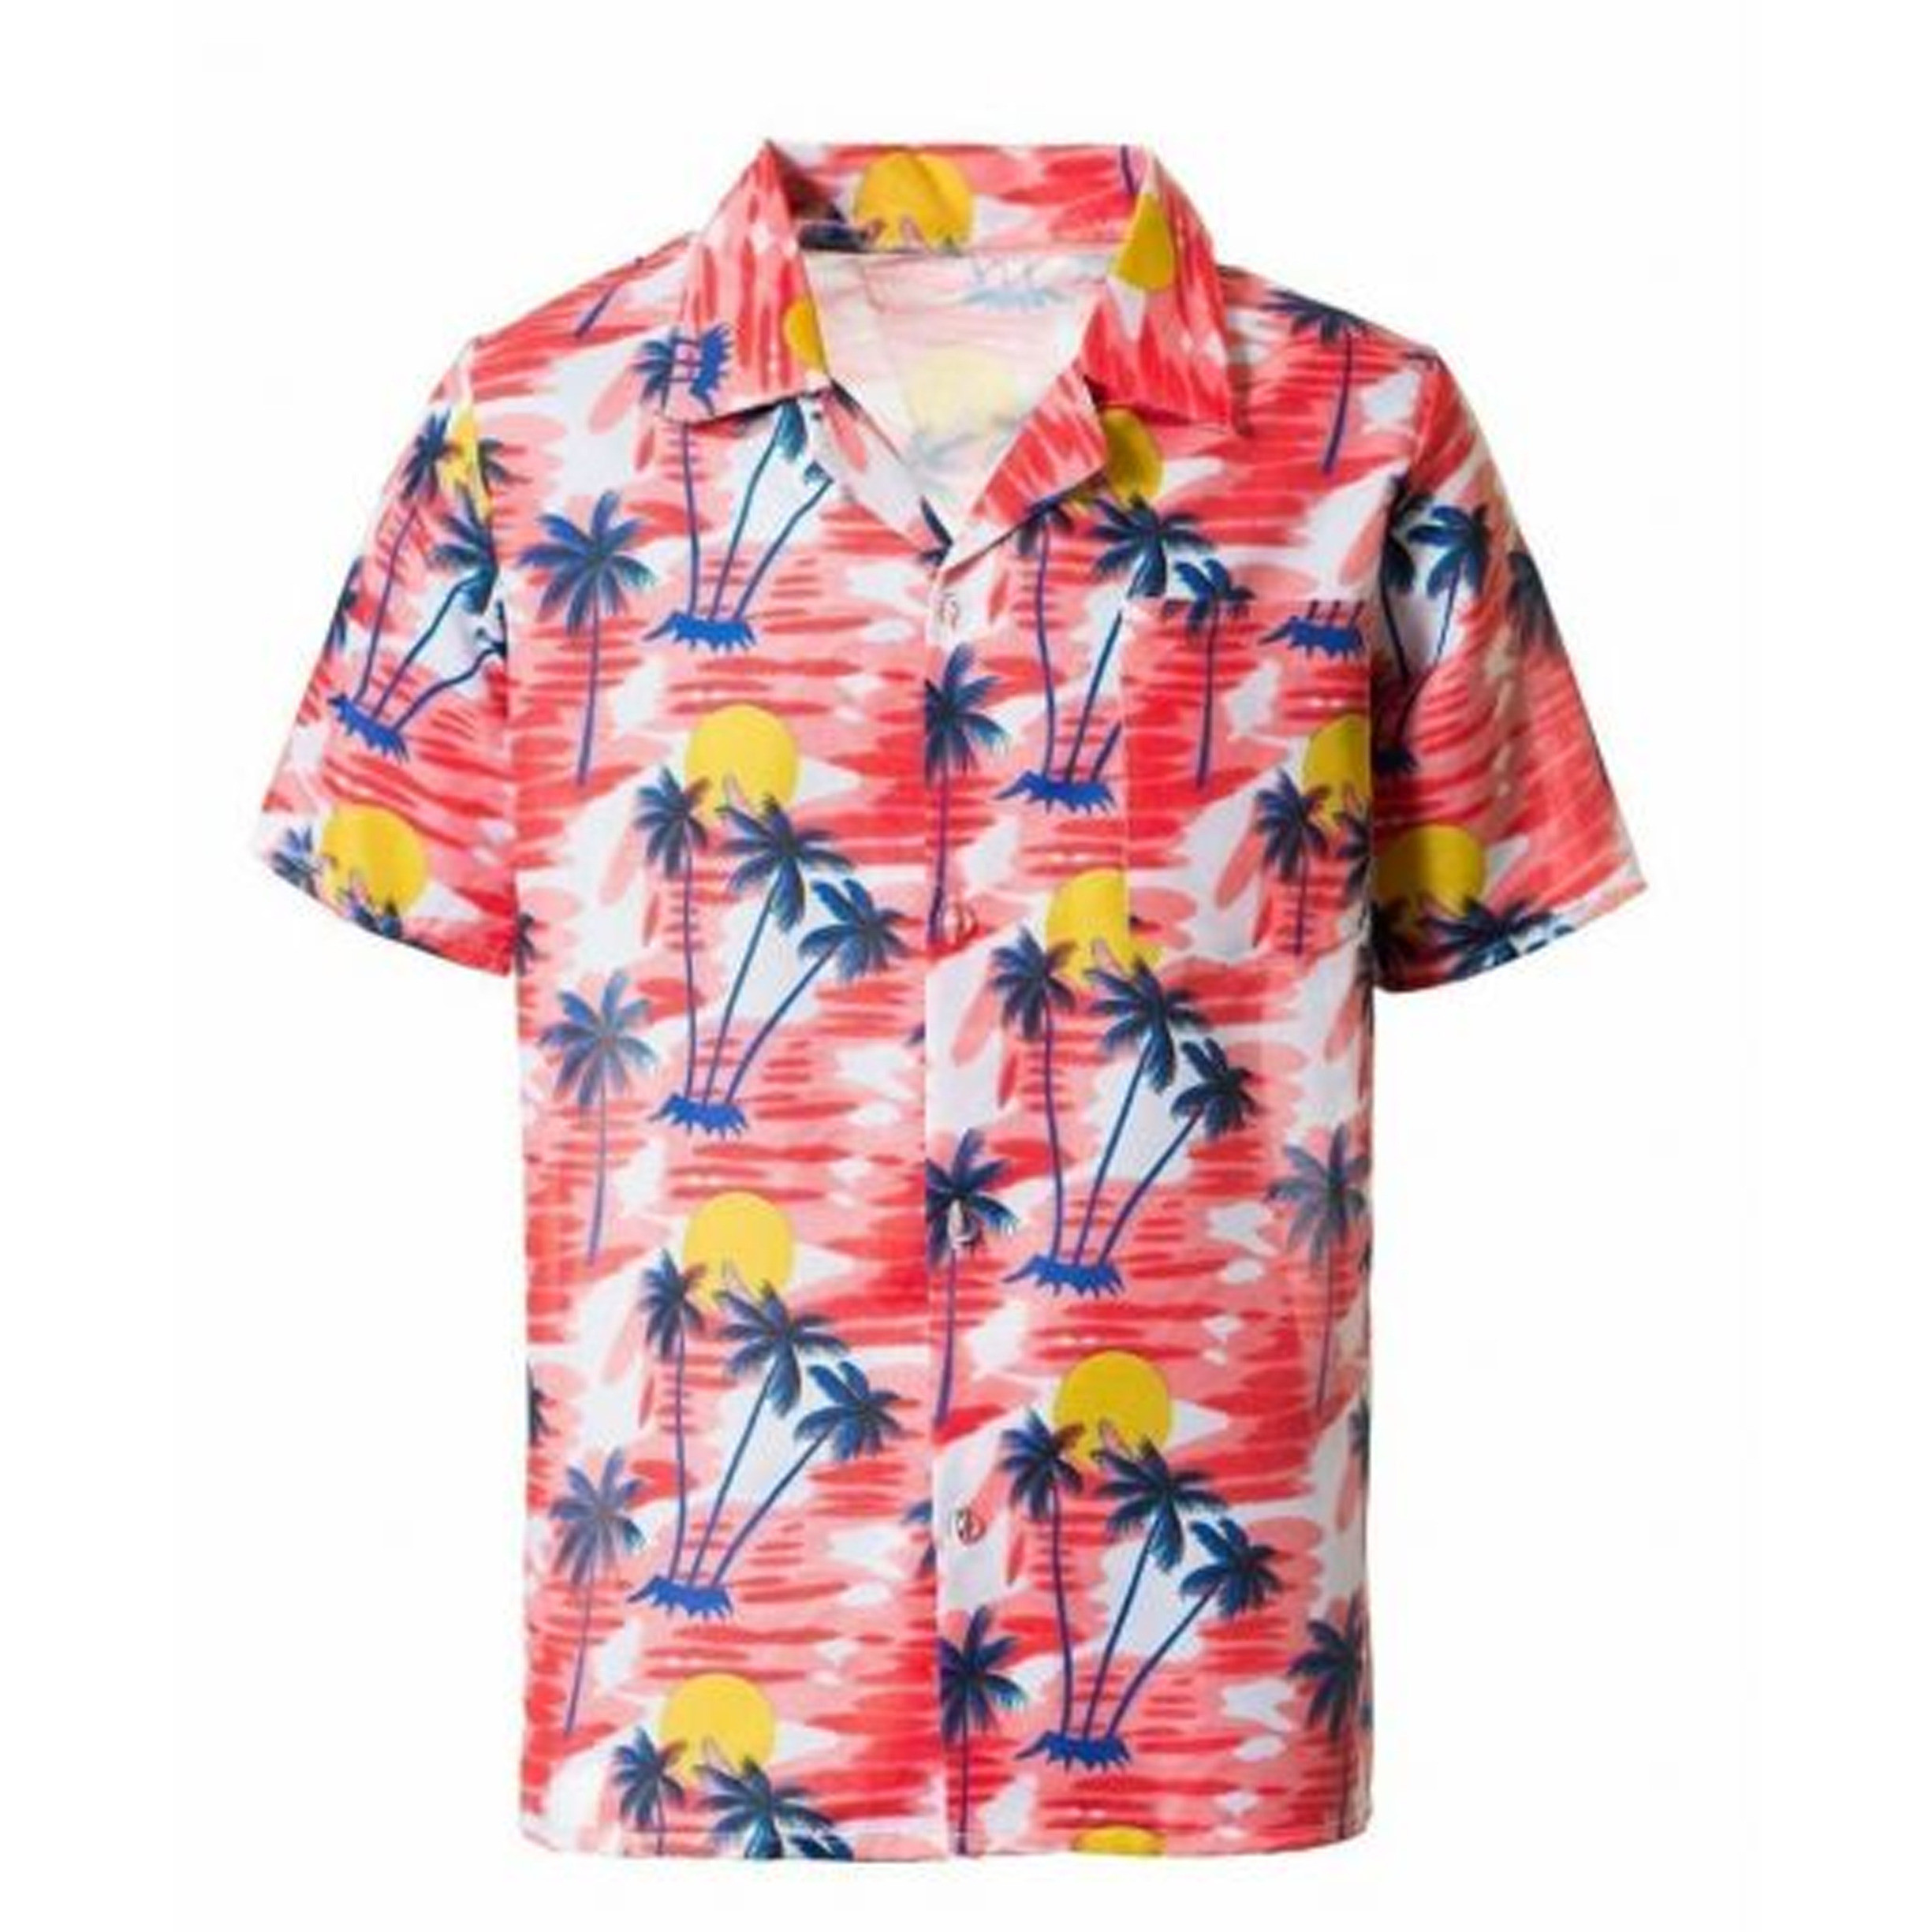 Toppers - Tropical party Hawaii blouse heren - palmbomen - rood - carnaval/themafeest - Plus size